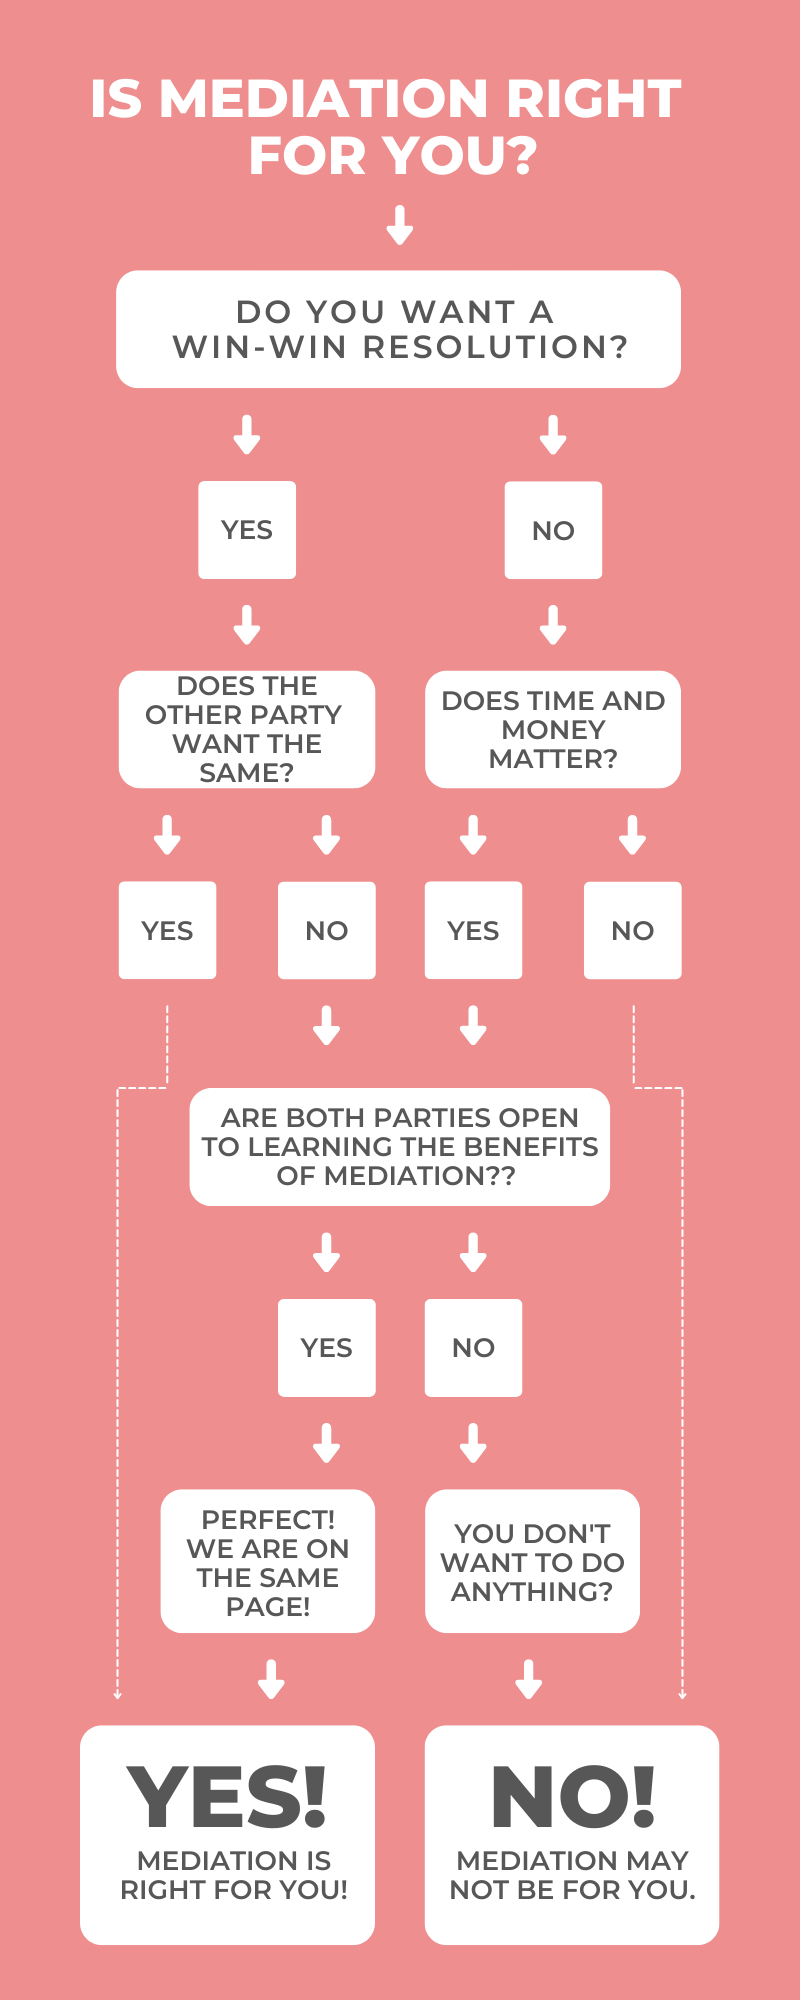 Is Mediation Right for You? Infographic